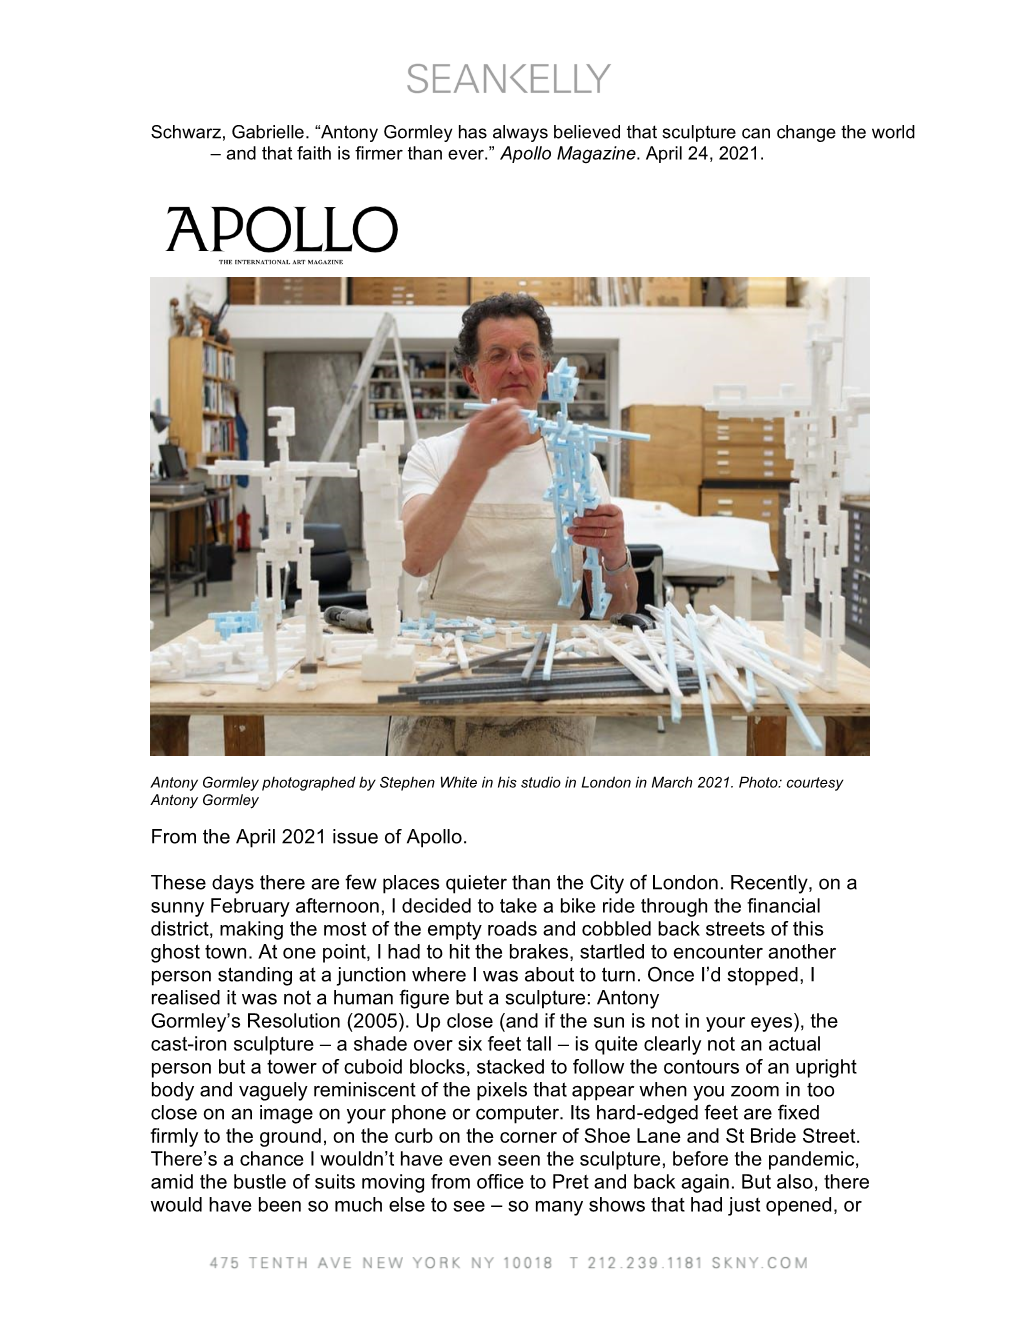 From the April 2021 Issue of Apollo. These Days There Are Few Places Quieter Than the City of London. Recently, on a Sunny Febr